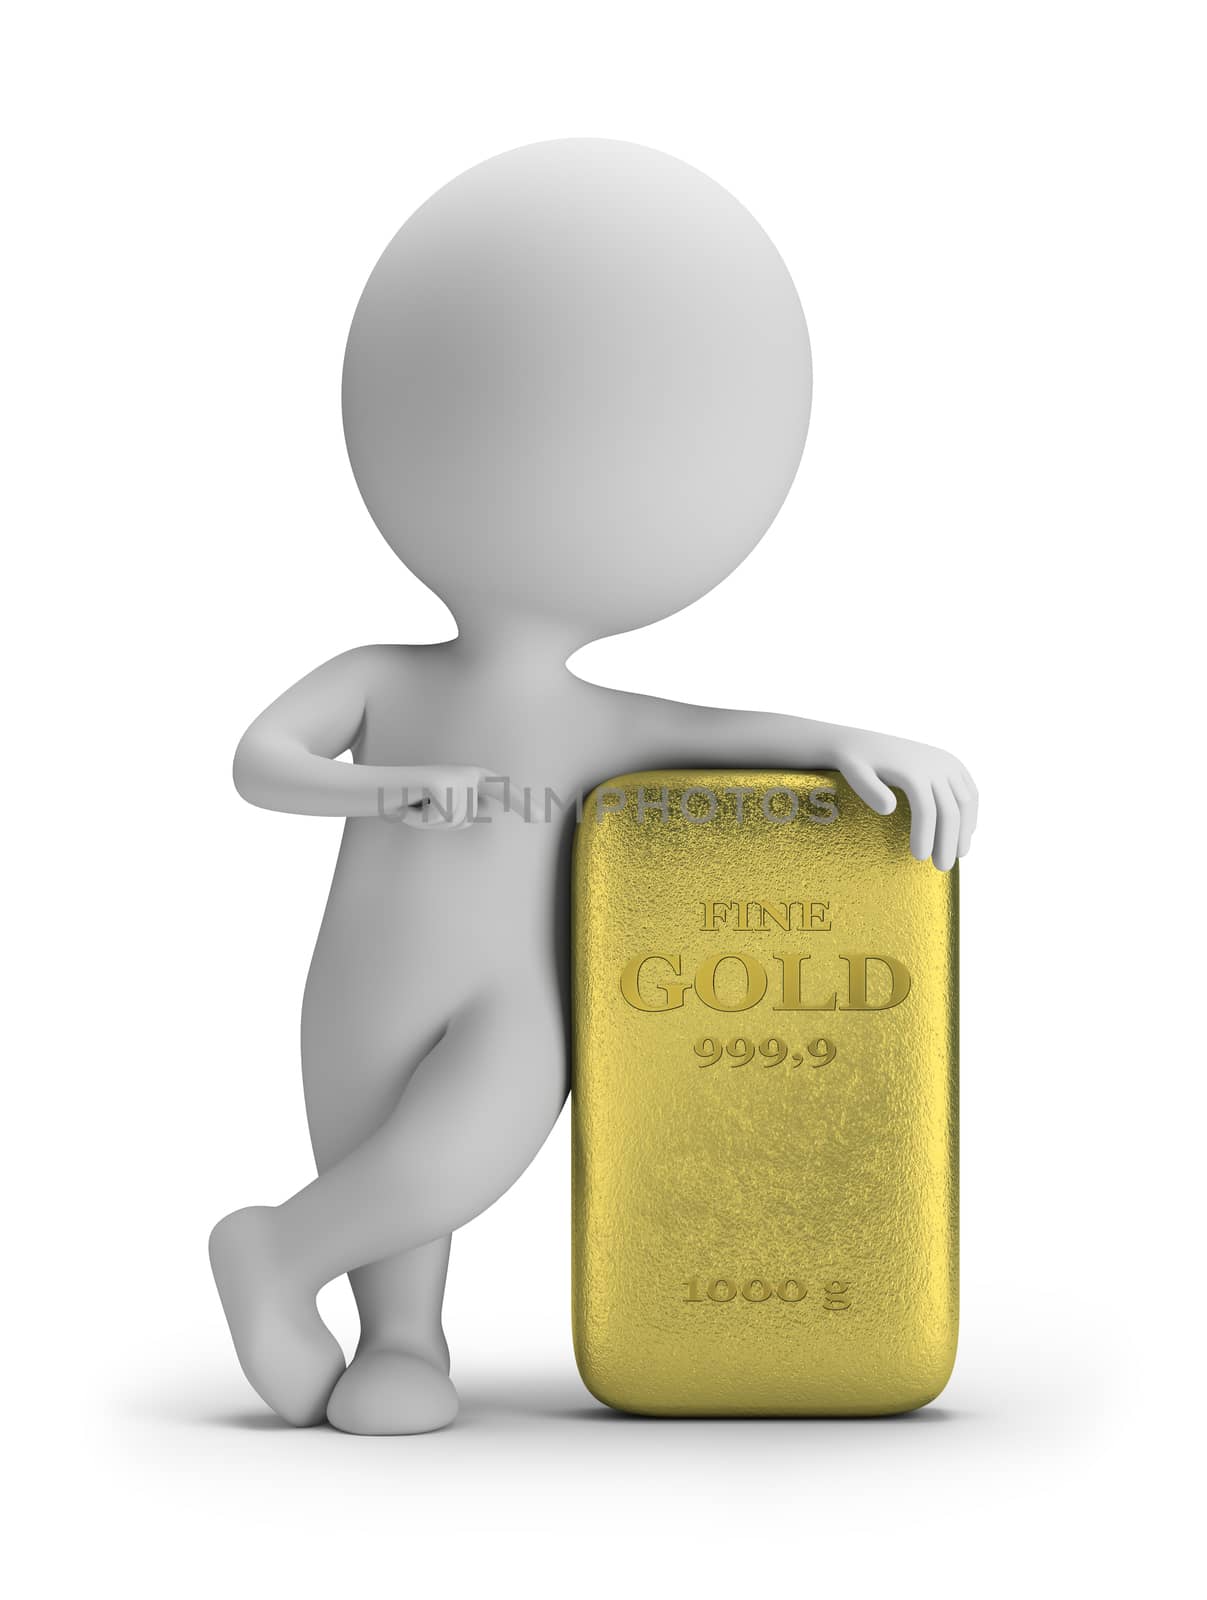 3d small person standing next to a golden nugget. 3d image. White background.